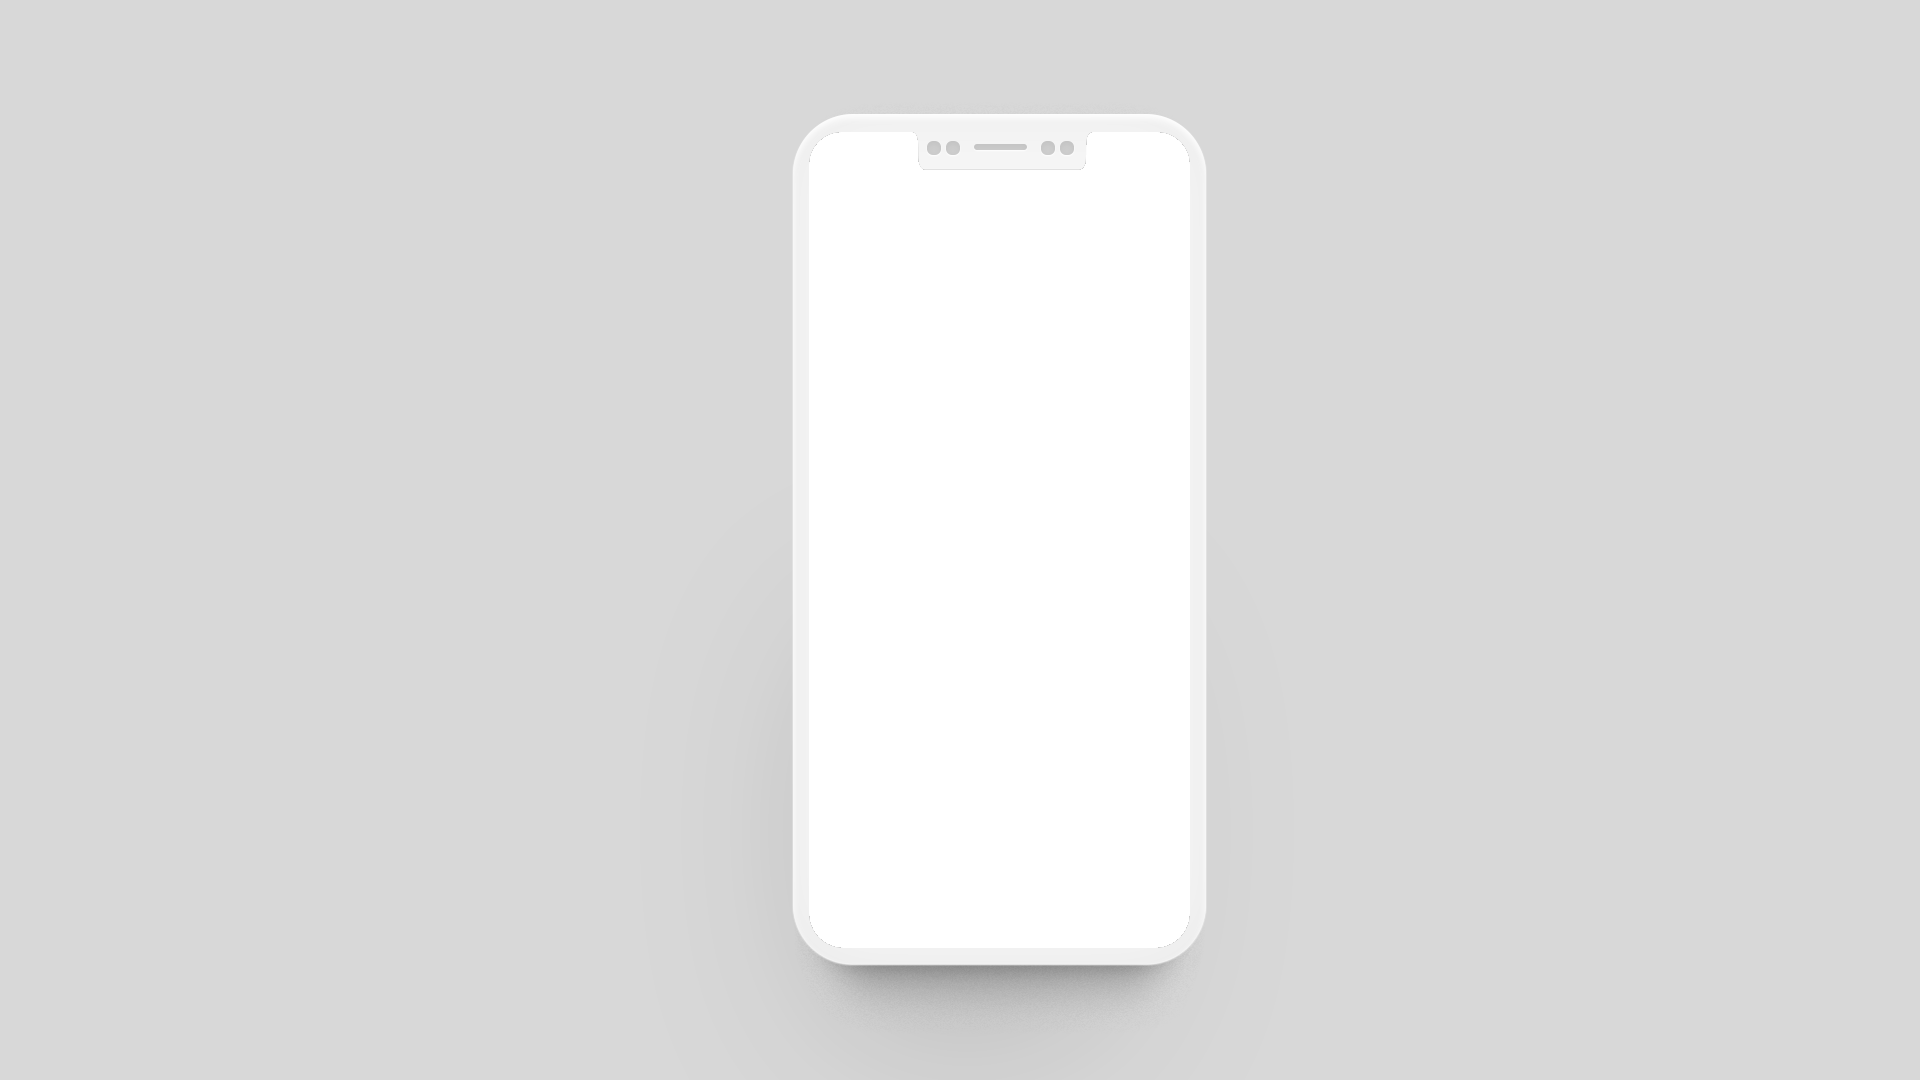 Download Messi iPhone 8 Mockup by Gonzalo Gelso on Dribbble